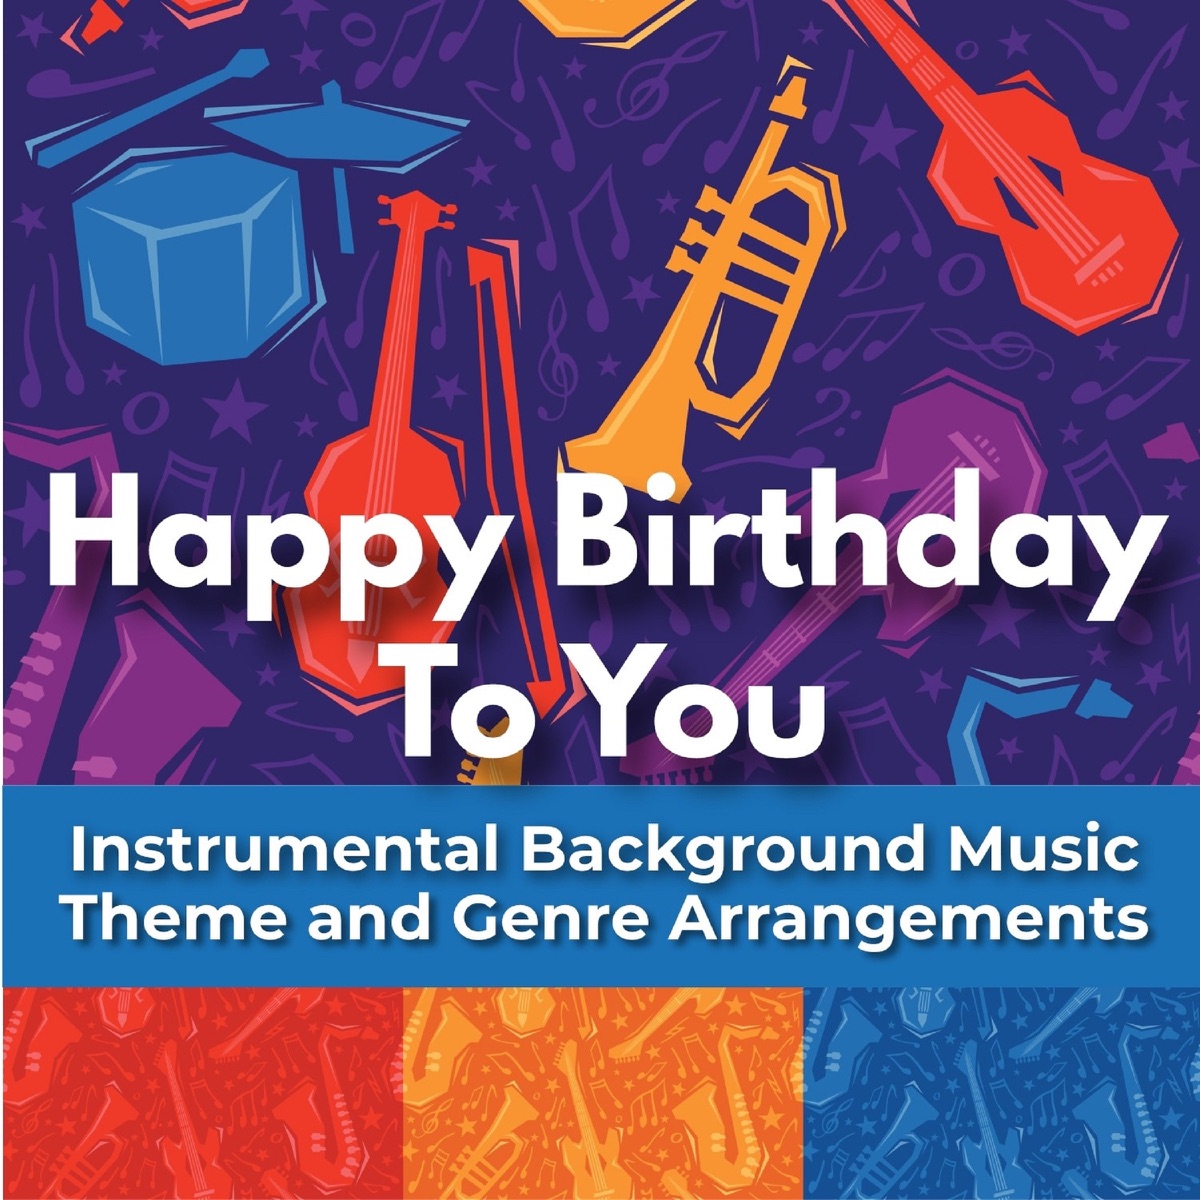 Happy Birthday to You - Instrumental Background Music Theme and Genre  Arrangements by Theme Stars on Apple Music